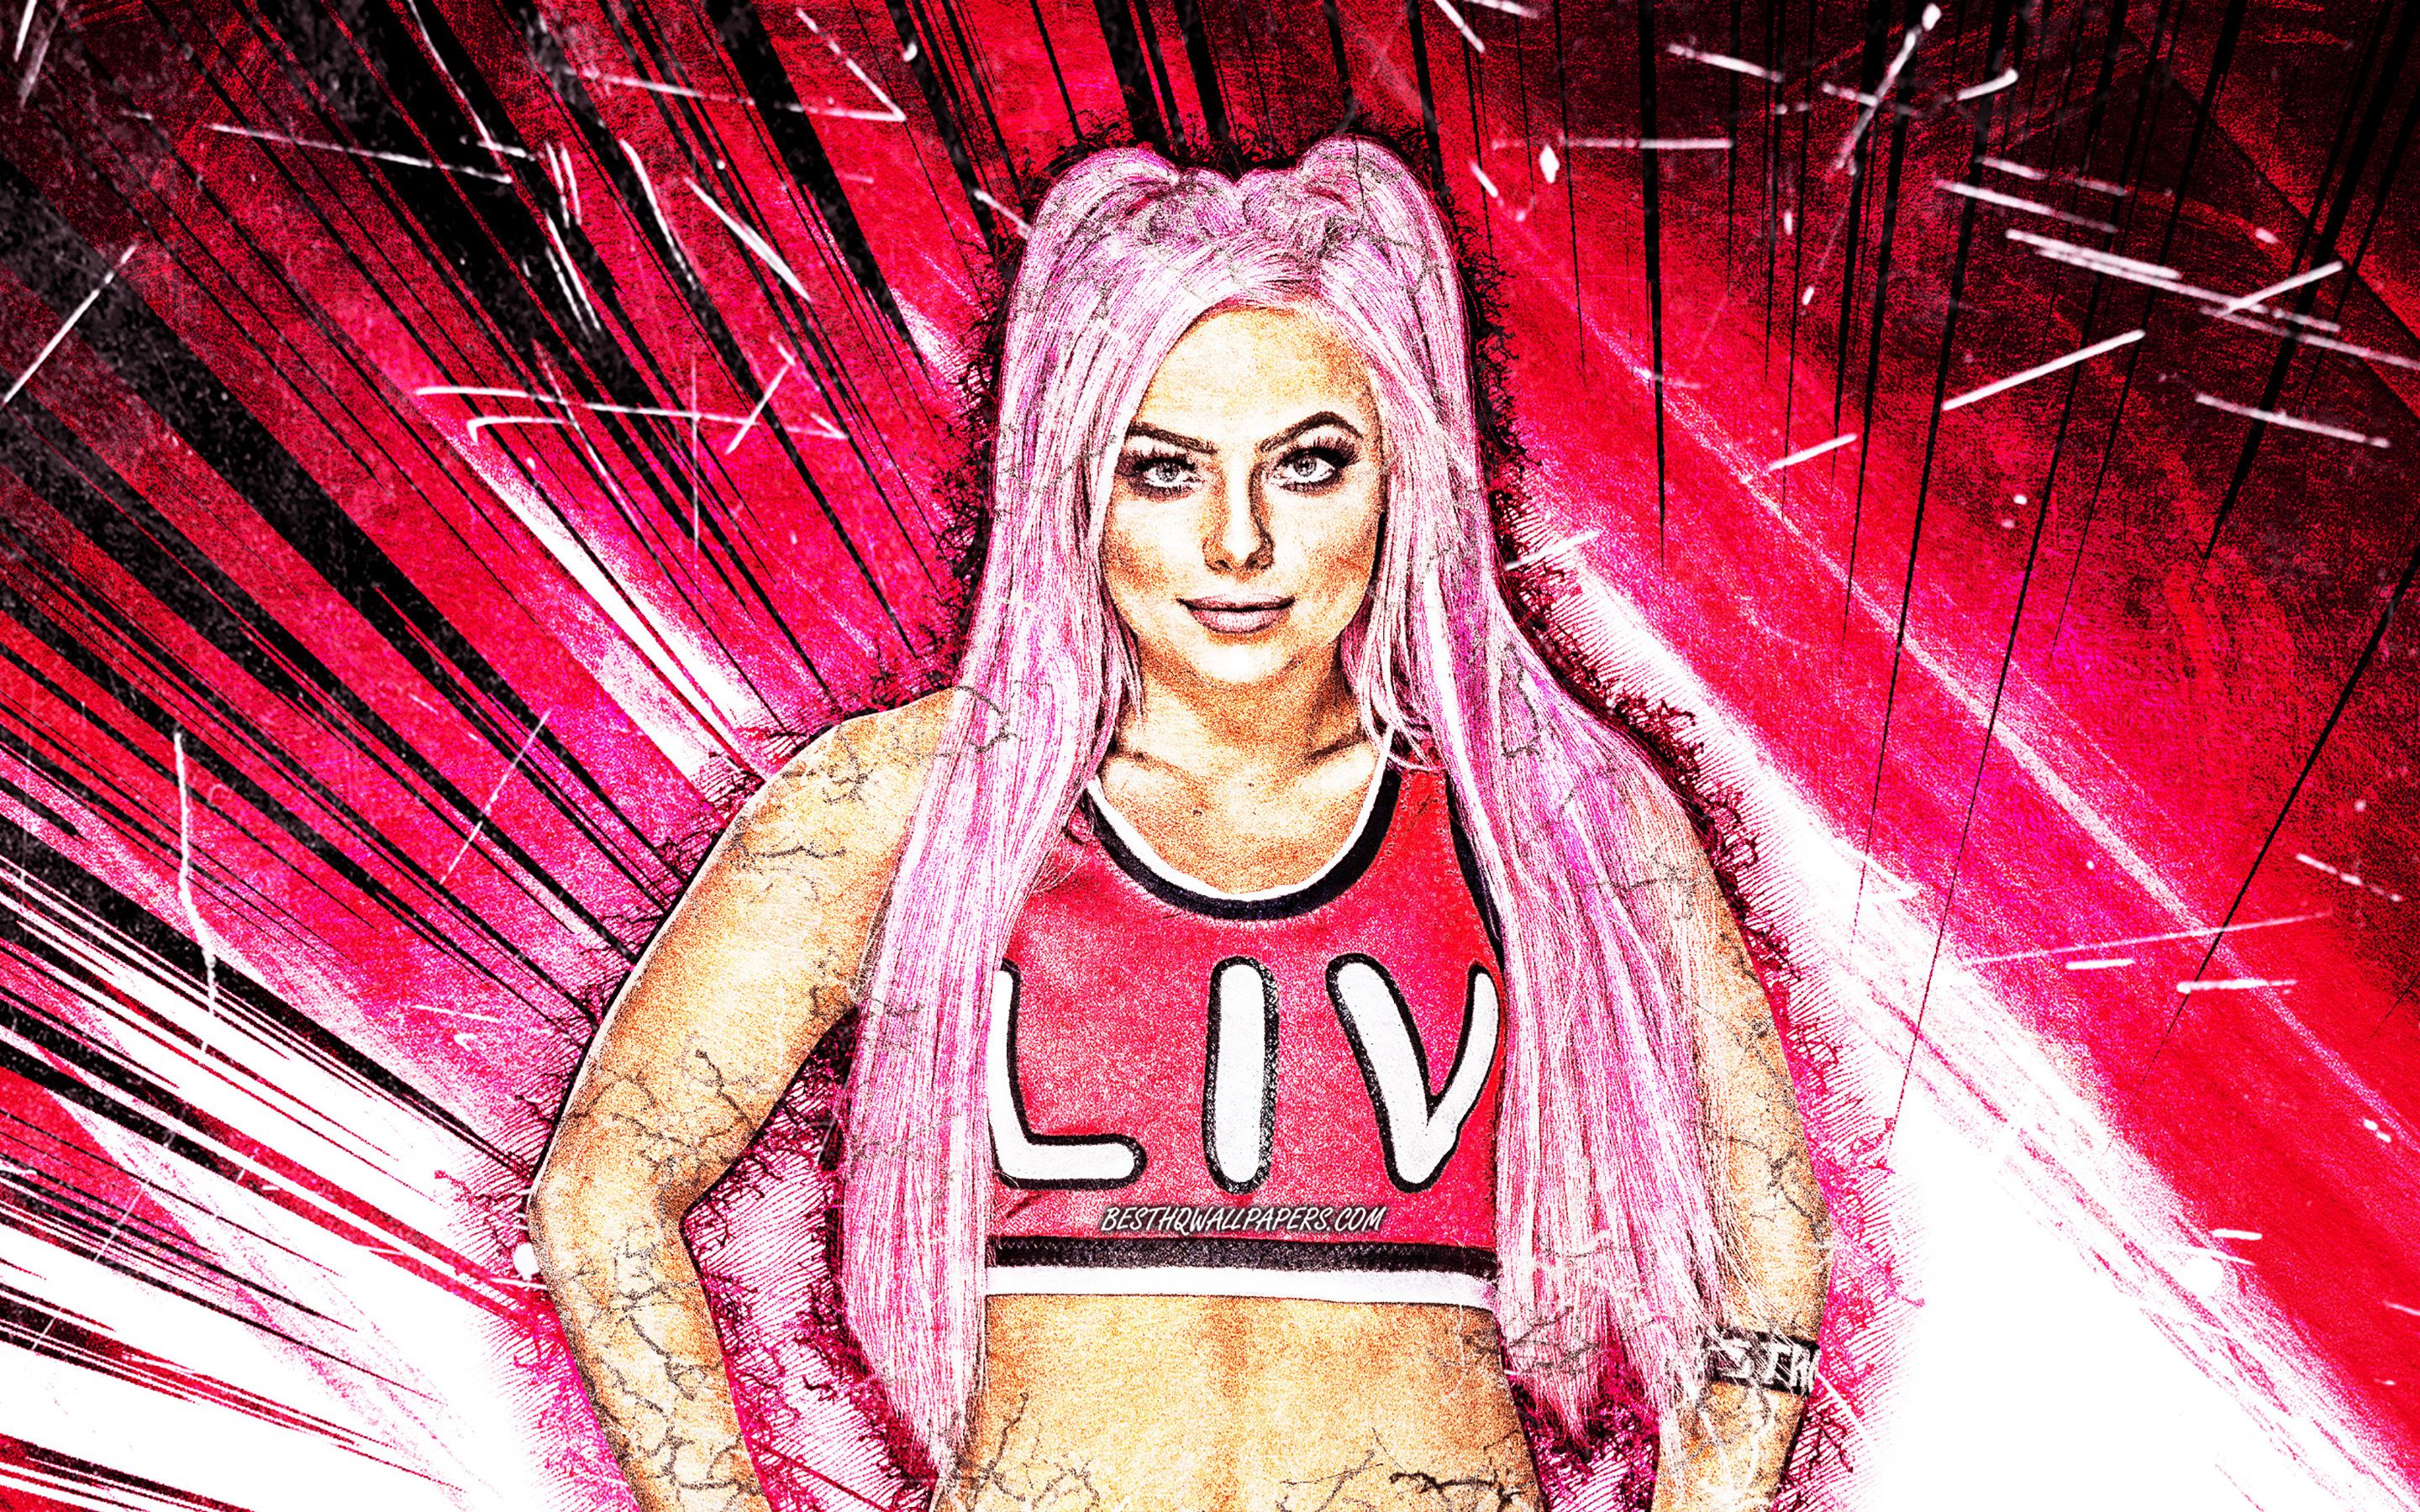 Download wallpaper Liv Morgan, WWE, grunge art, american wrestlers, wrestling, purple abstract rays, Gionna Daddio, female wrestlers, wrestlers for desktop with resolution 2880x1800. High Quality HD picture wallpaper